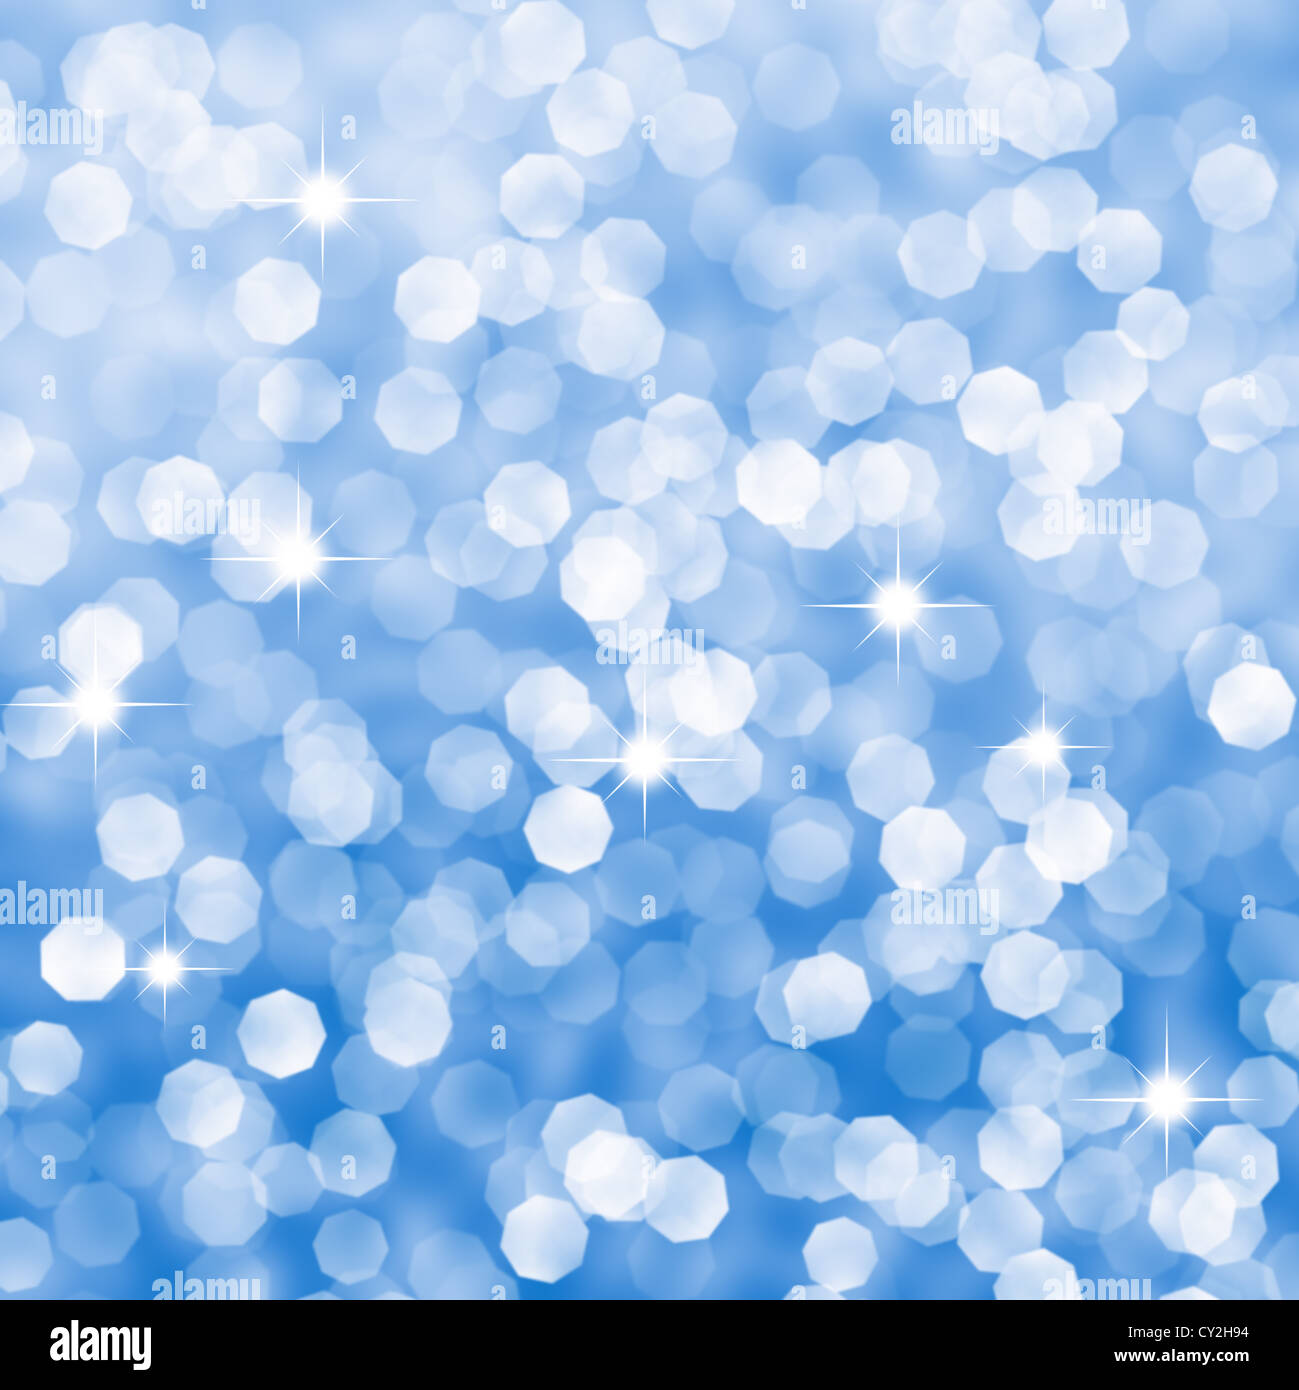 Abstract blue sparkles defocused background Stock Photo